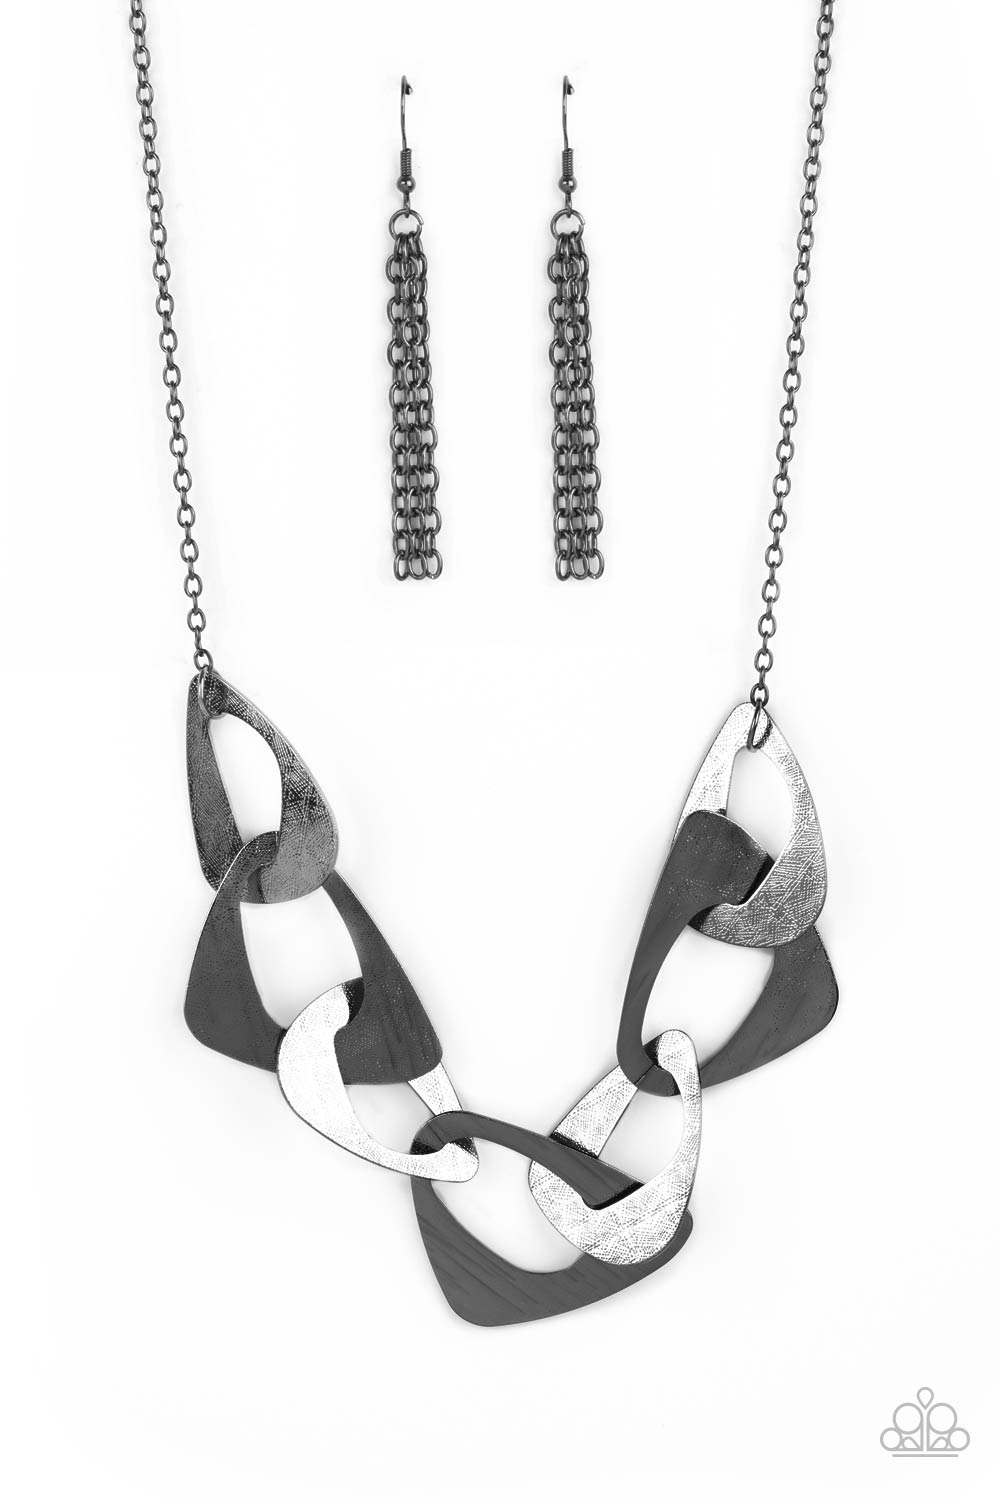 Guide To The Galaxy Black Necklace - Paparazzi Accessories  Large triangular cutouts stamped in a lightly dotted texture link below the collar forming a dramatic display of gunmetal slices. Features an adjustable clasp closure.  All Paparazzi Accessories are lead free and nickel free!  Sold as one individual necklace. Includes one pair of matching earrings.